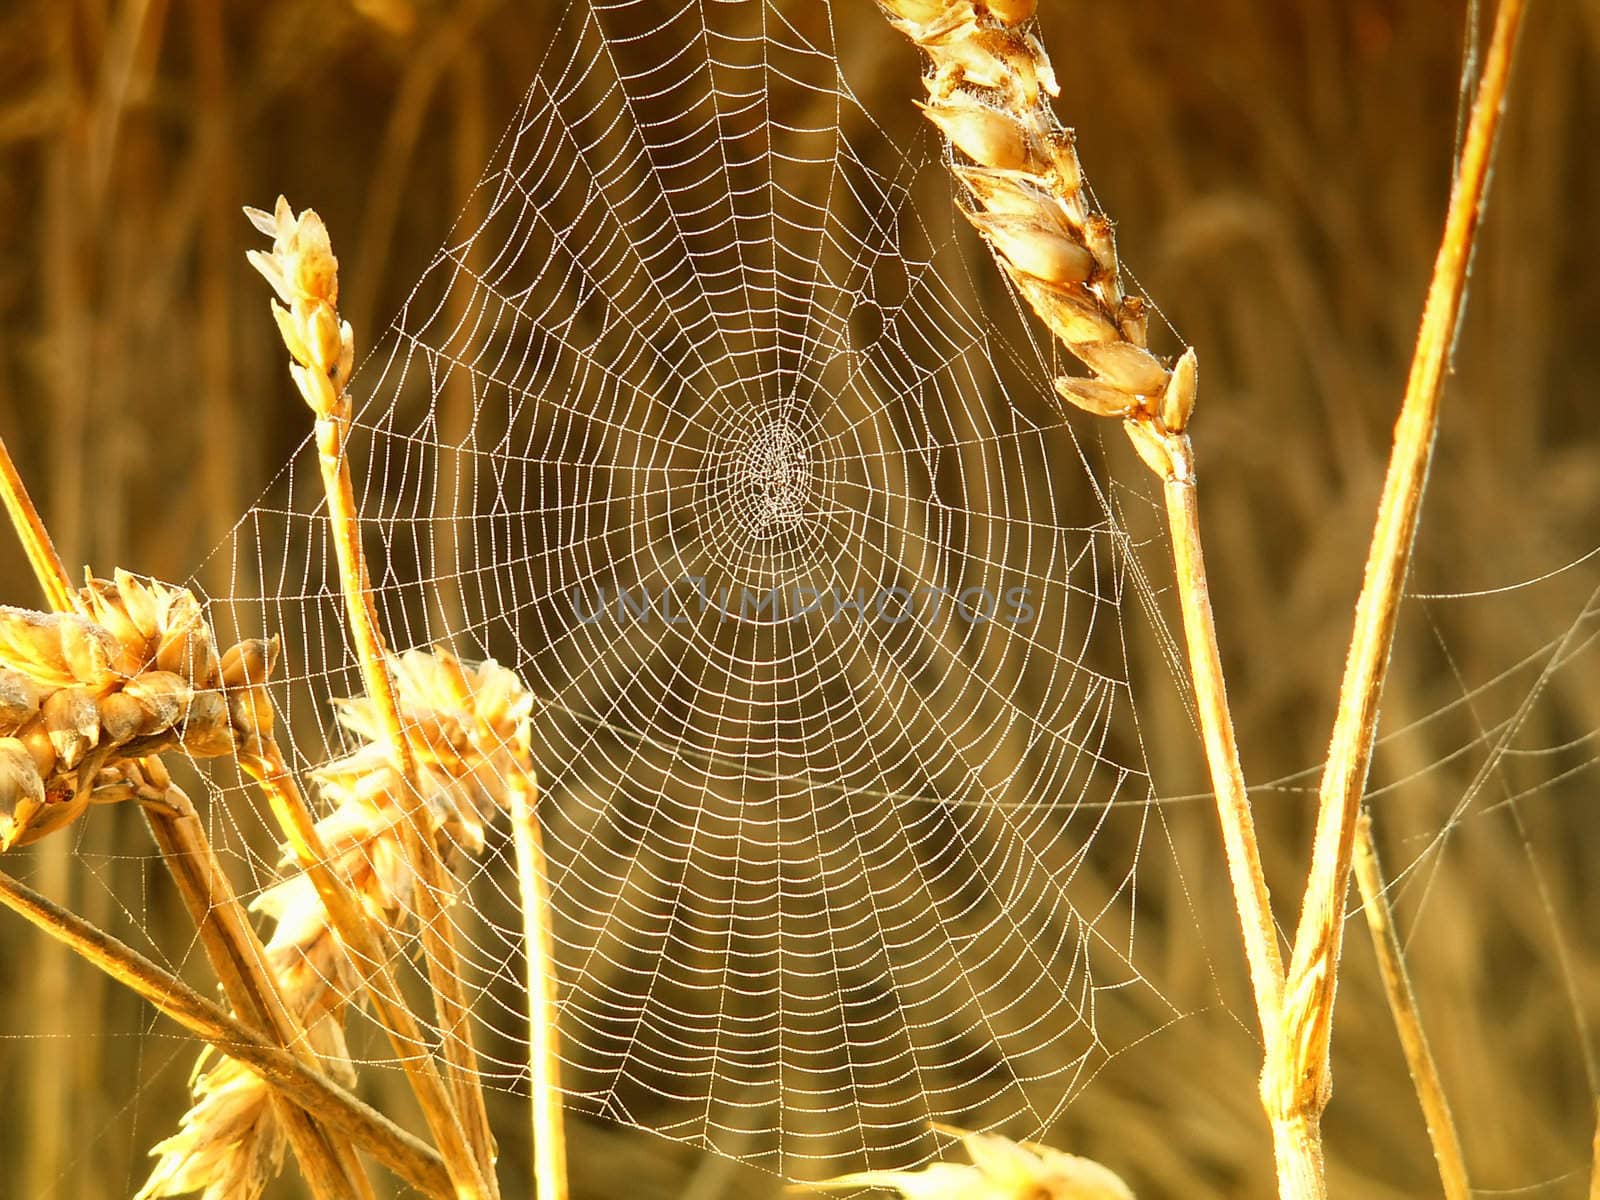 spider in its web in the wheat by njaj